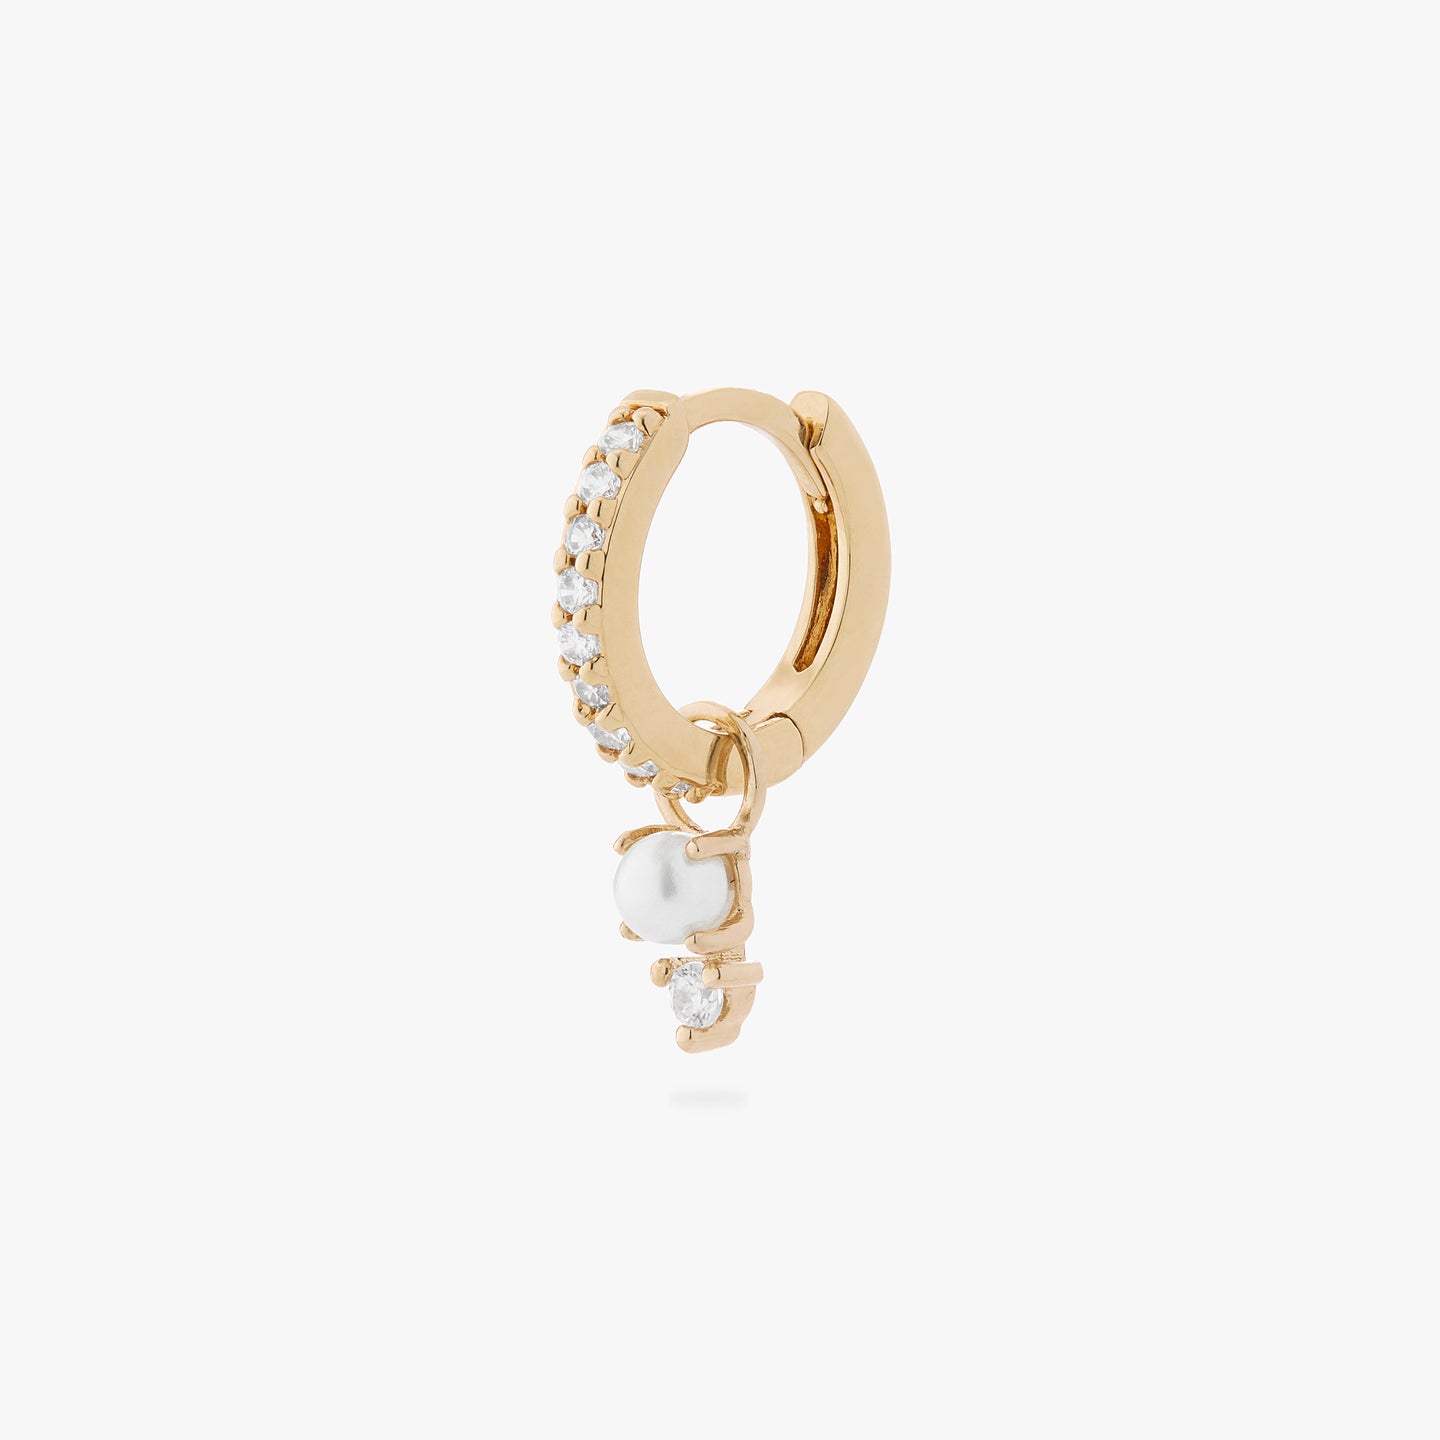 a mini pave huggie in gold/clear with a charm that has a stacked pearl and clear cz color:null|gold/pearl